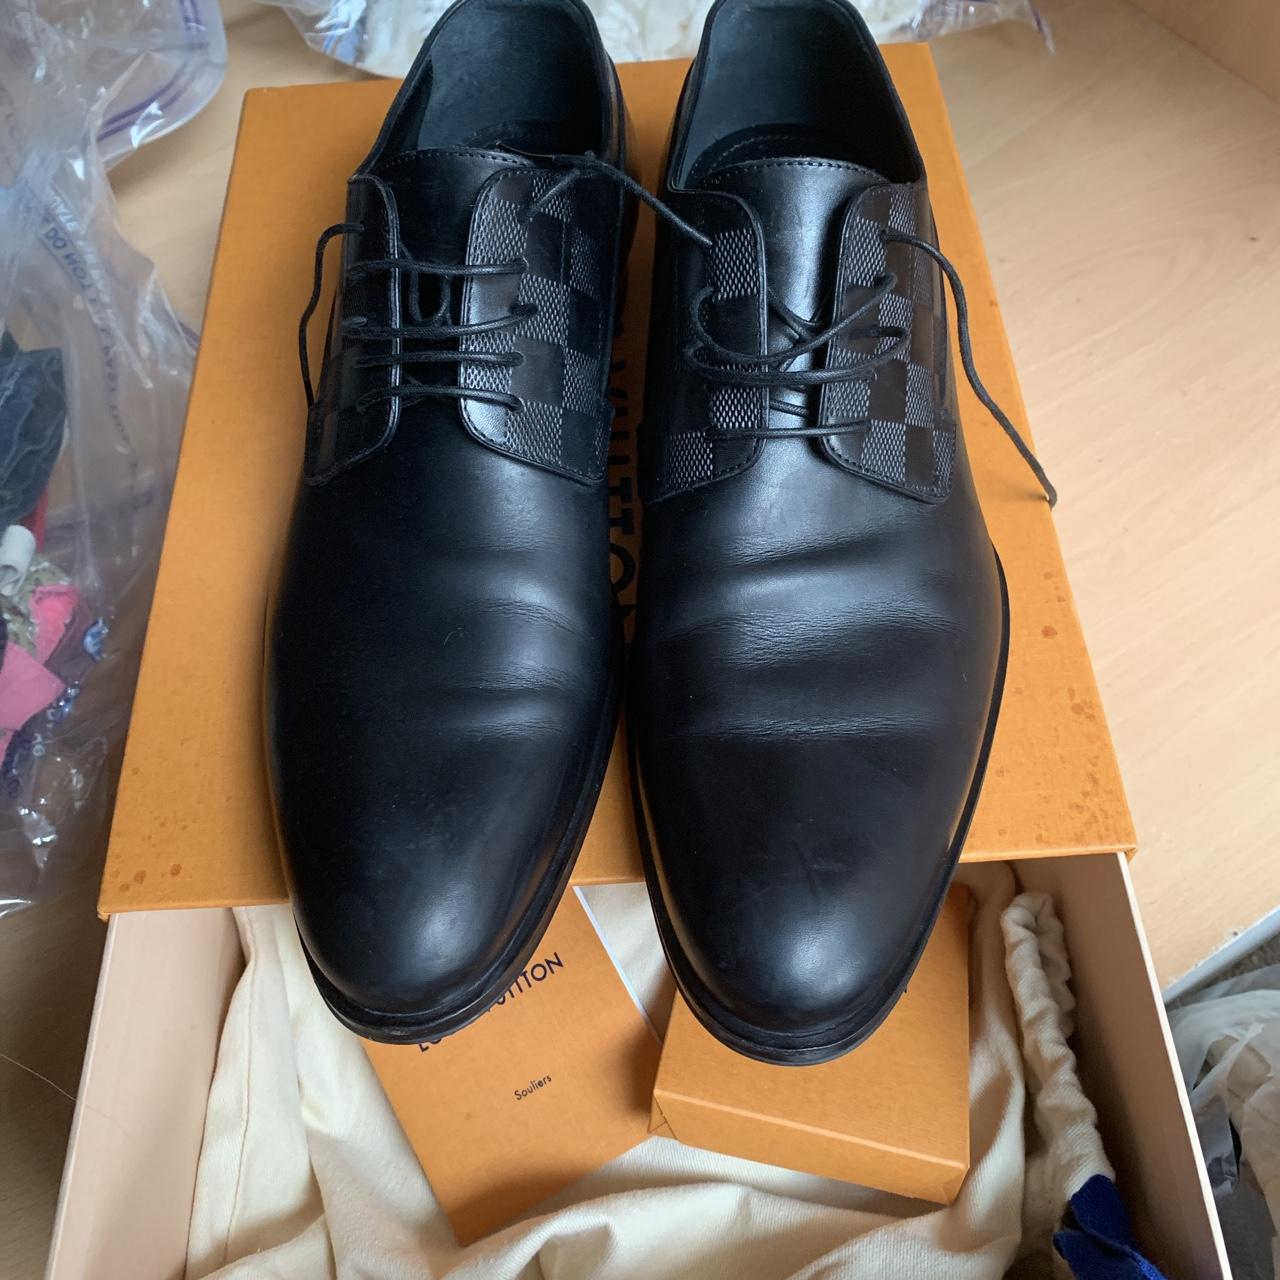 Louis Vuitton Haussmann Derby shoes purchased from